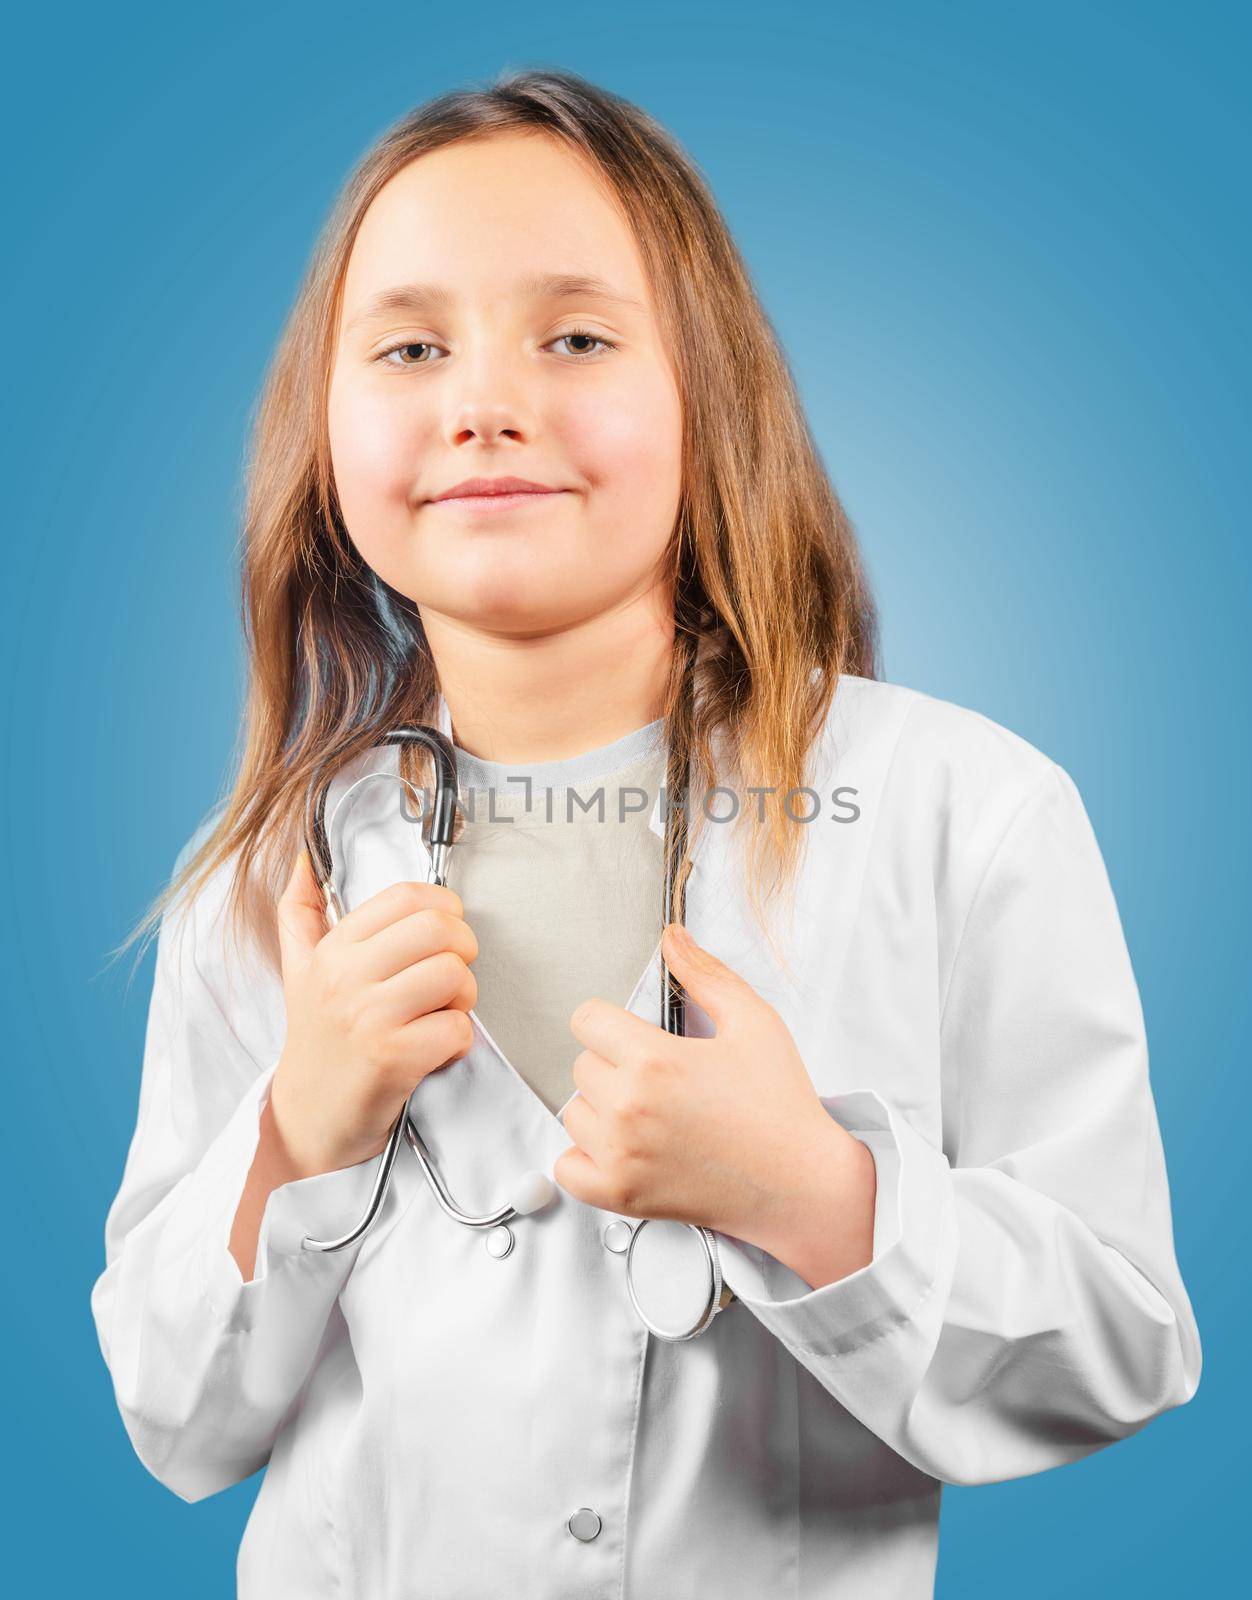 Happy little girl in medical uniform with stethoscope, concept of future profession